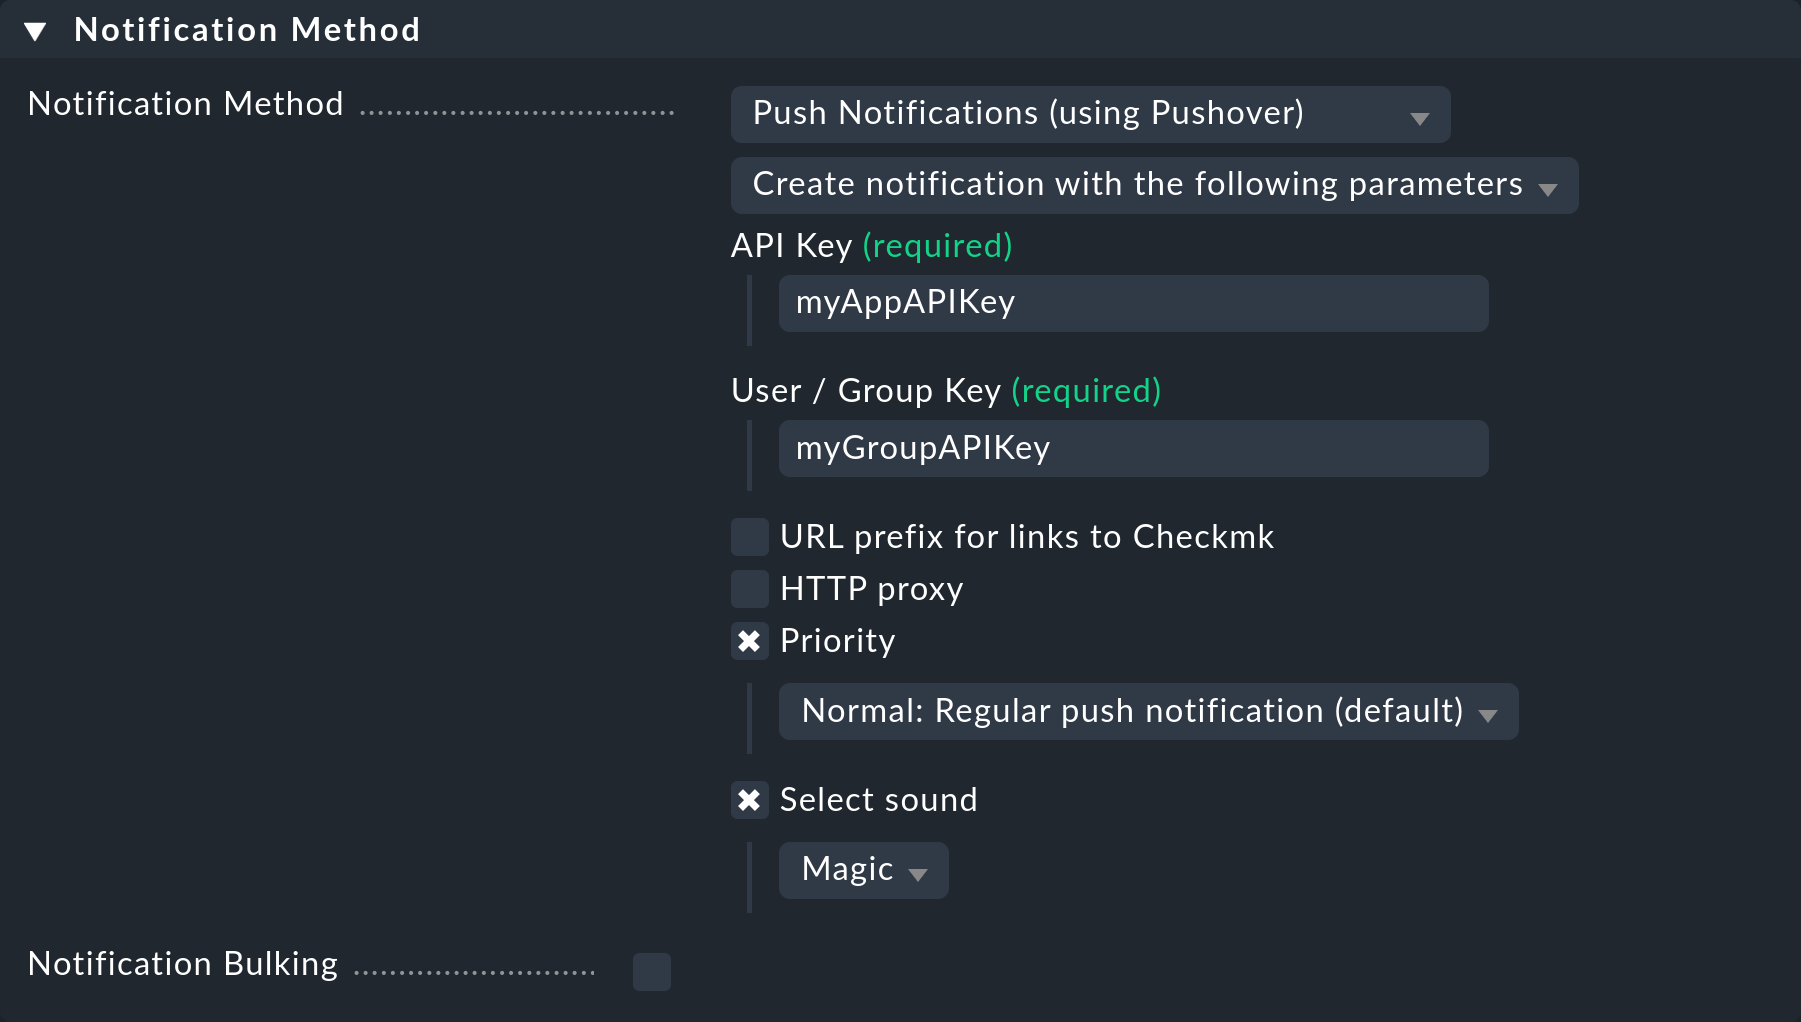 The notification method settings for Pushover.